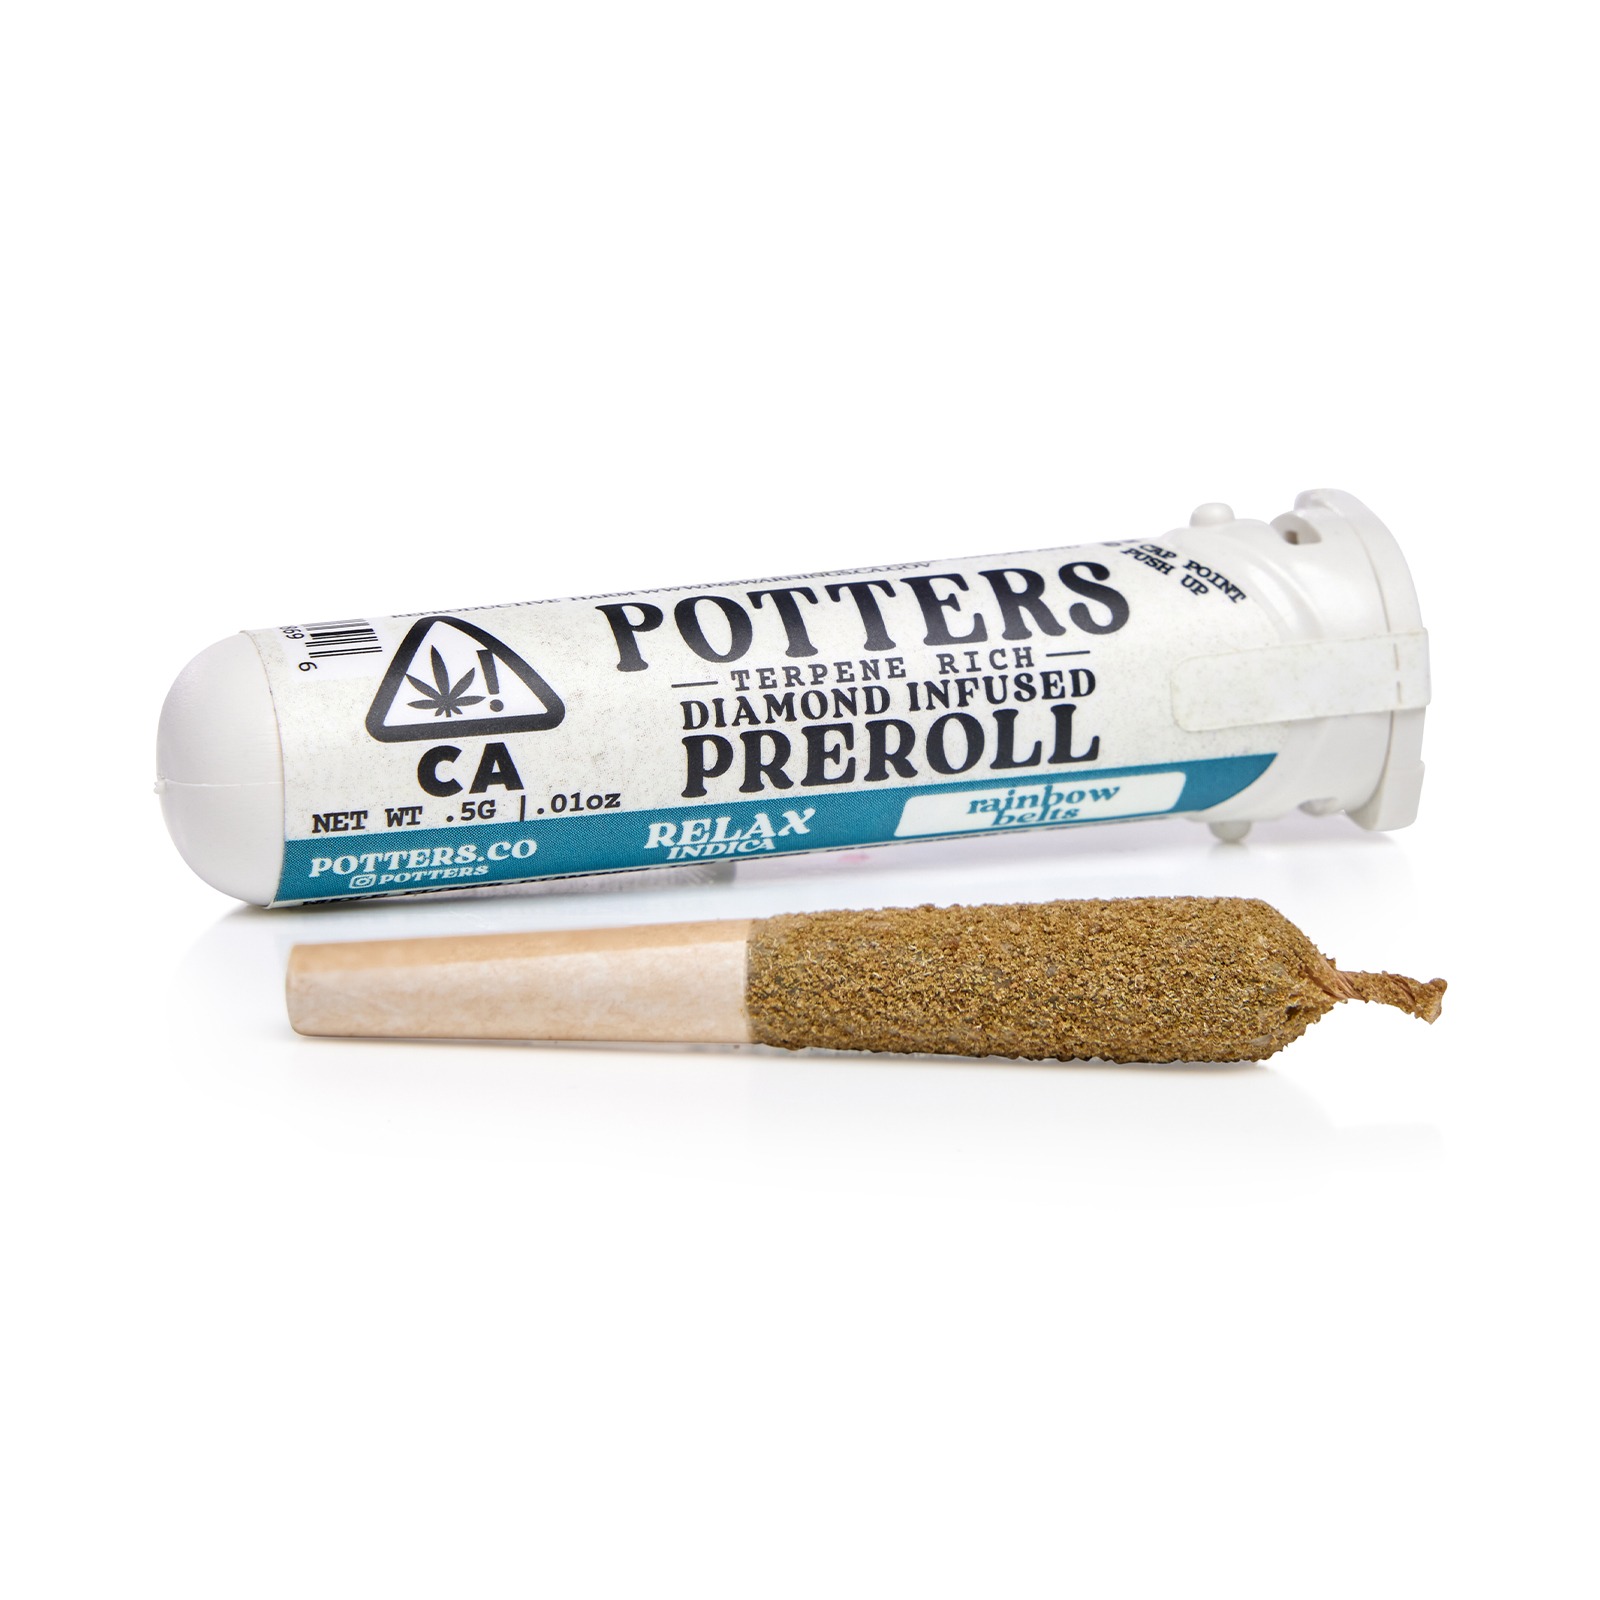 POTTERS: Better High for a Greener Earth.